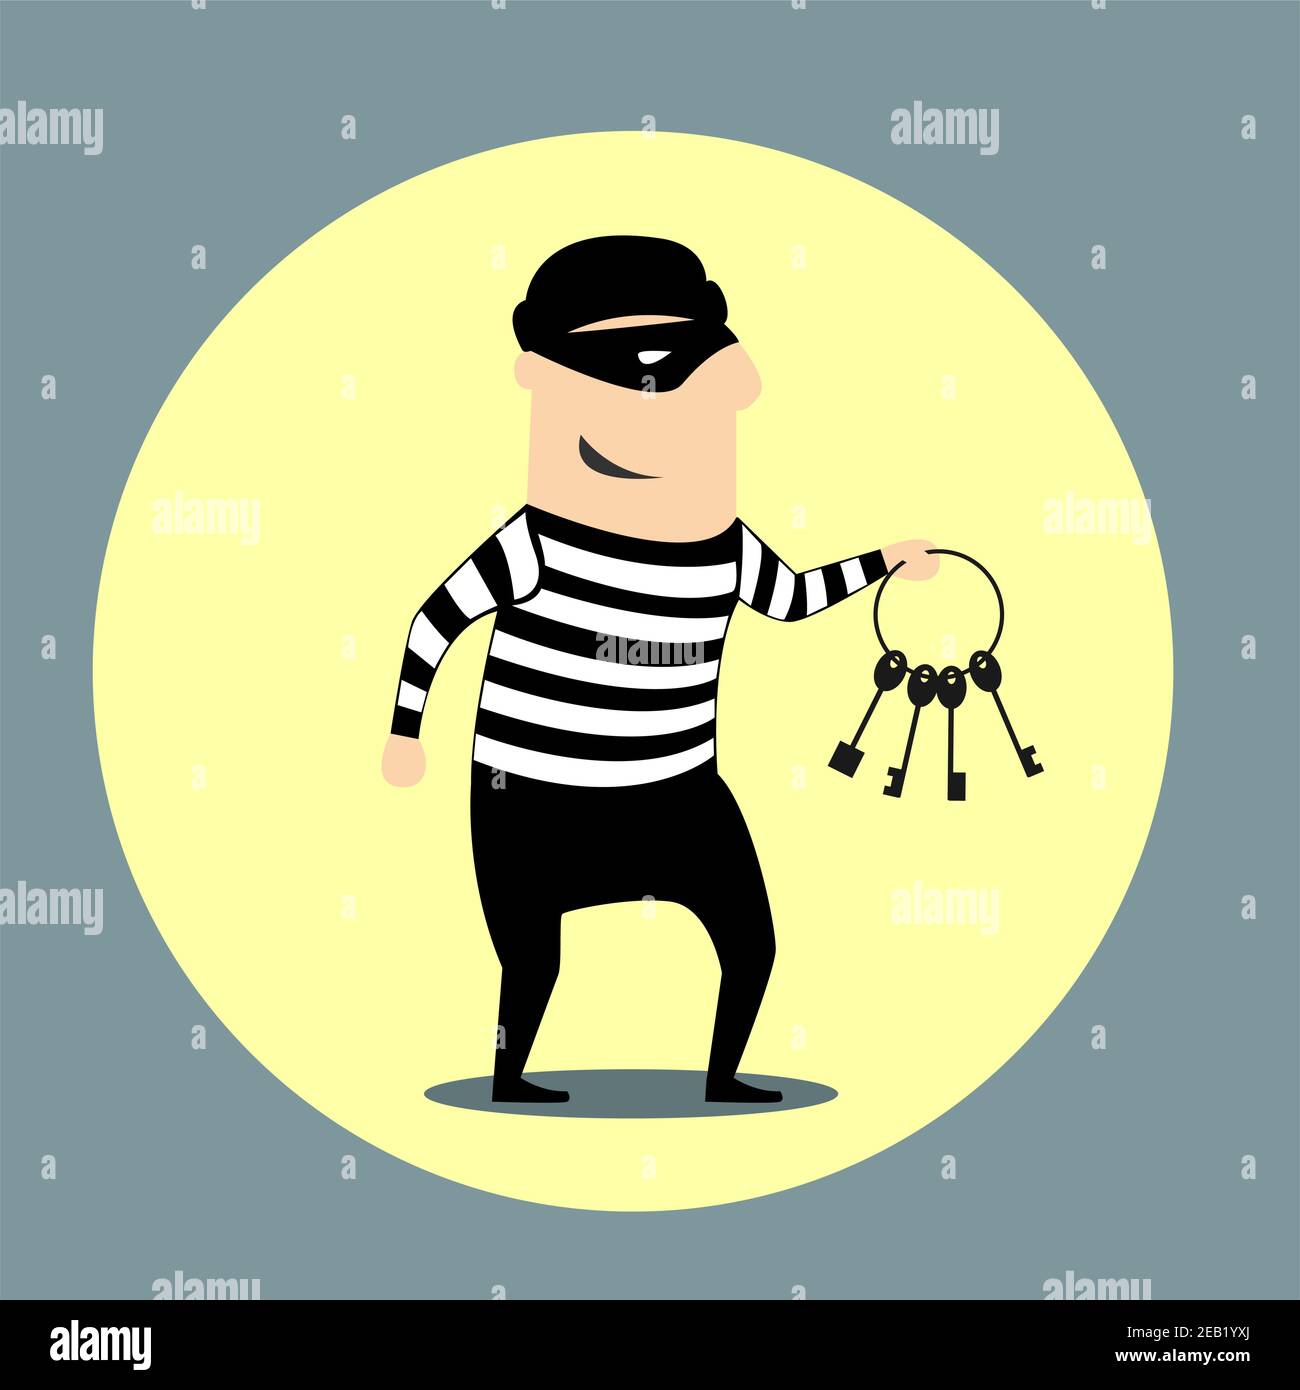 Burglar Dressed In A Mask And Striped Clothes Carrying A Bunch Of Keys Inside A Yellow Circular